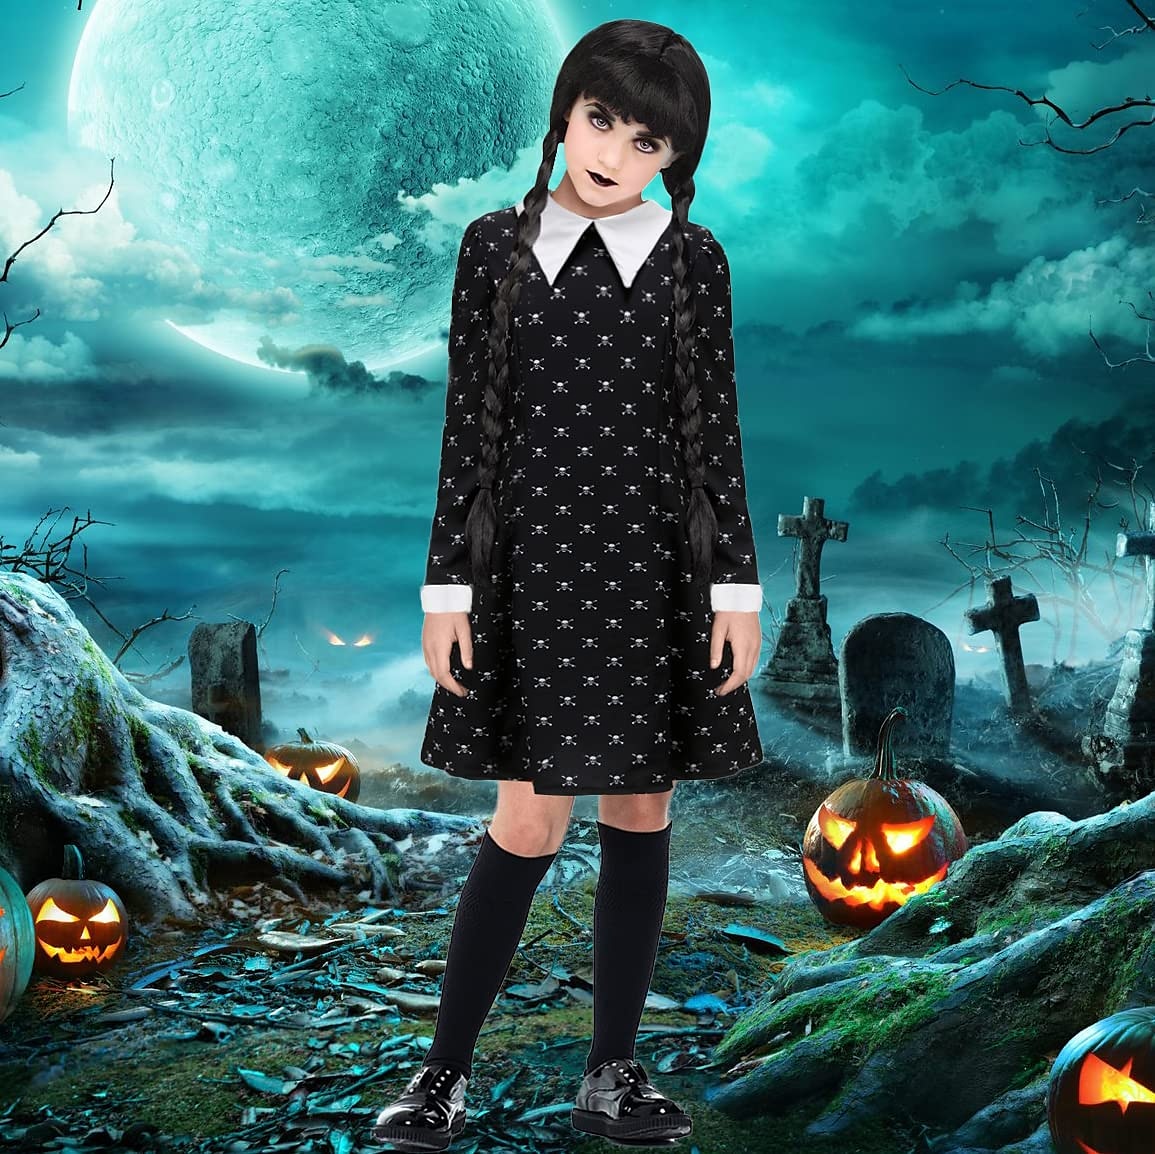 Addams Dress Cosplay Costume Wednesday Addams Family Dress for Women Floral  Dress Halloween Costume